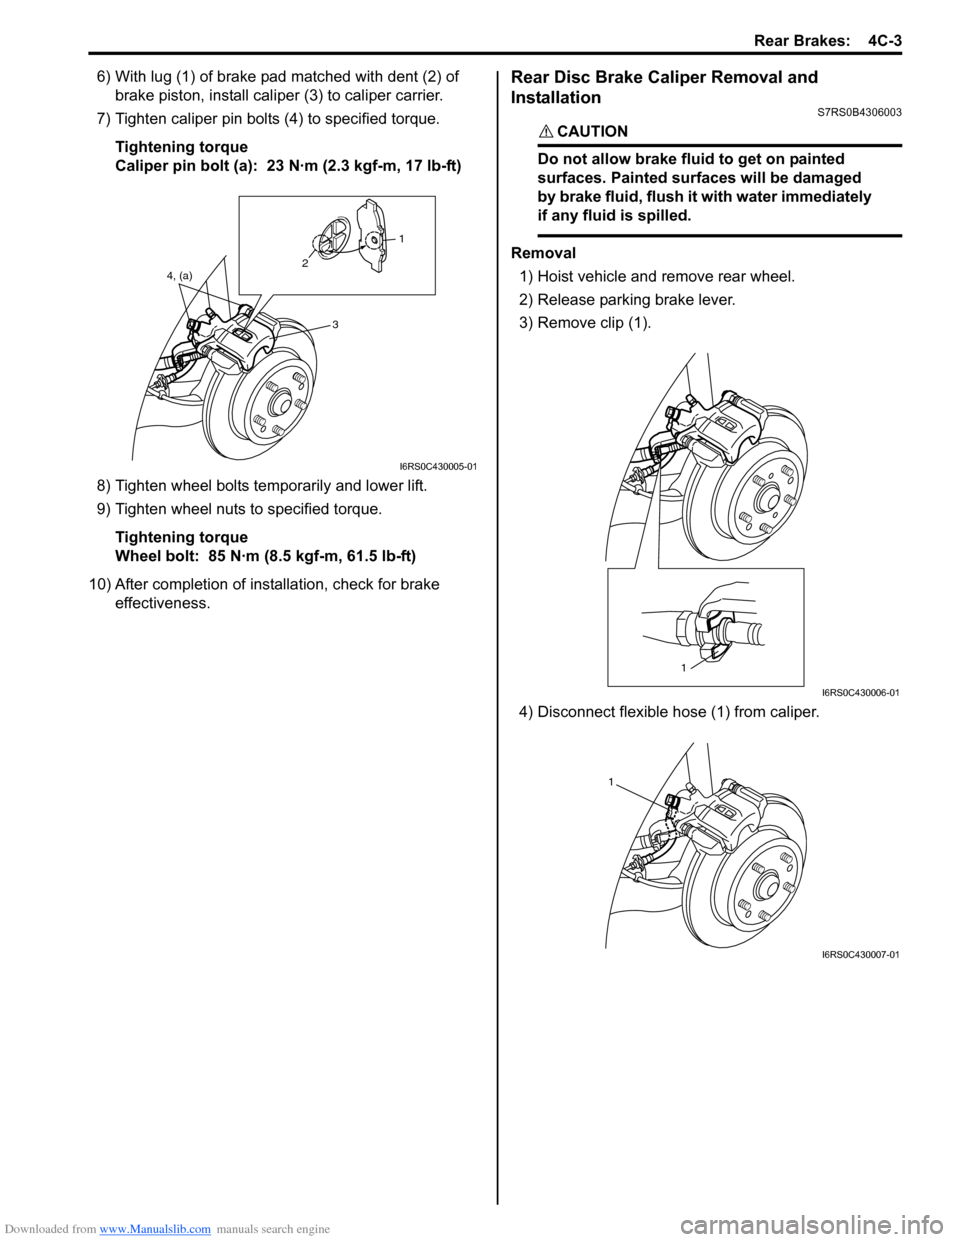 SUZUKI SWIFT 2006 2.G Service Owners Manual Downloaded from www.Manualslib.com manuals search engine Rear Brakes:  4C-3
6) With lug (1) of brake pad matched with dent (2) of brake piston, install caliper  (3) to caliper carrier.
7) Tighten cali